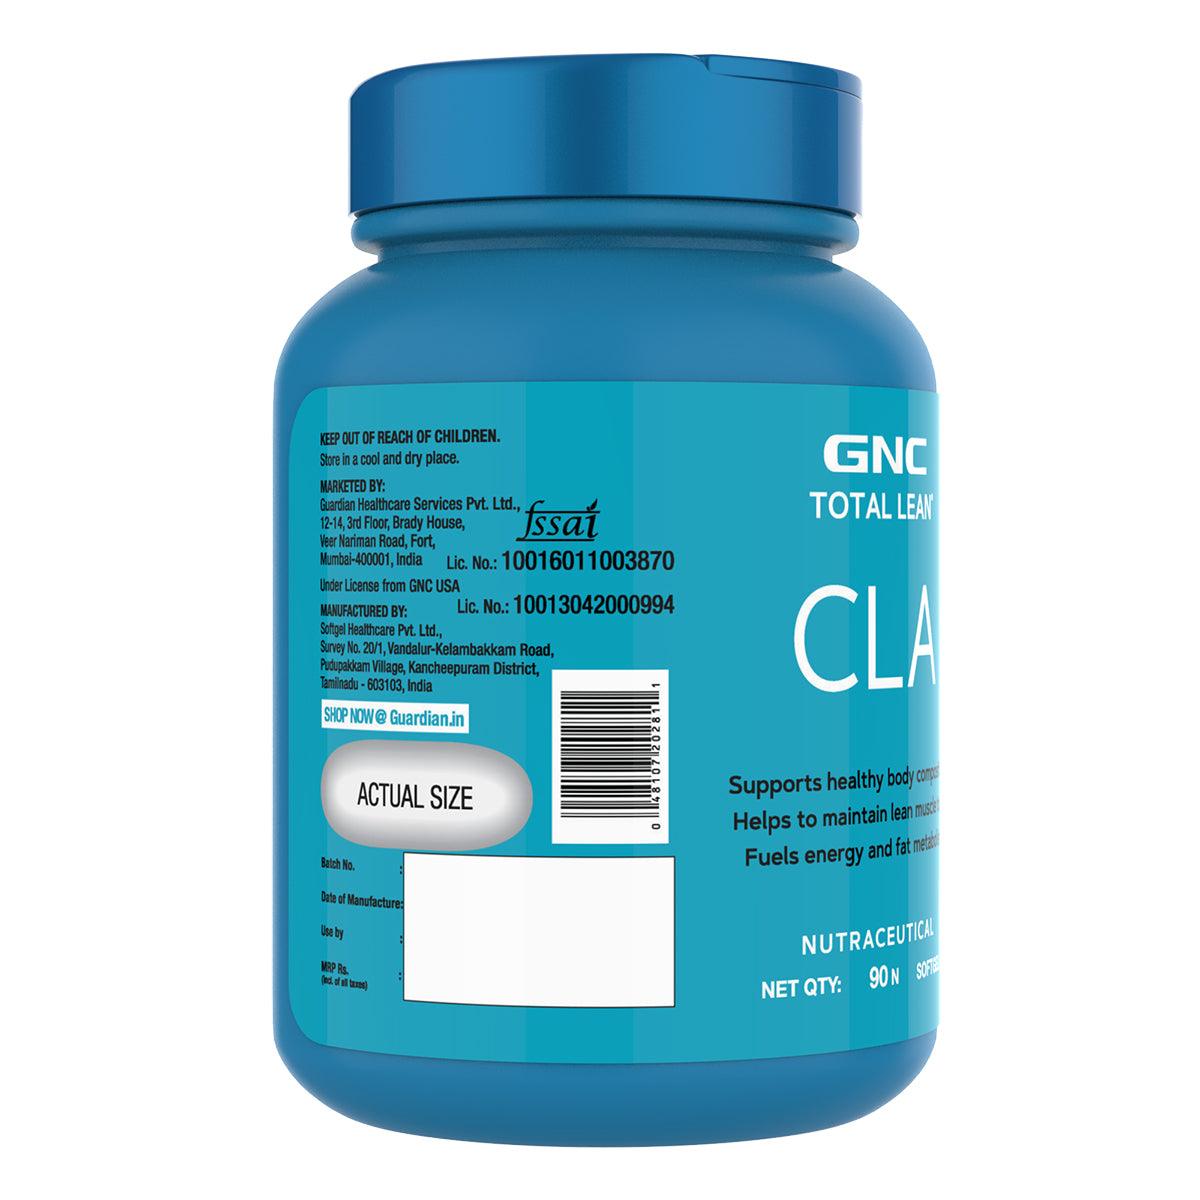 GNC Total Lean CLA - Fat Burn for Healthy Weight Management - GNC India